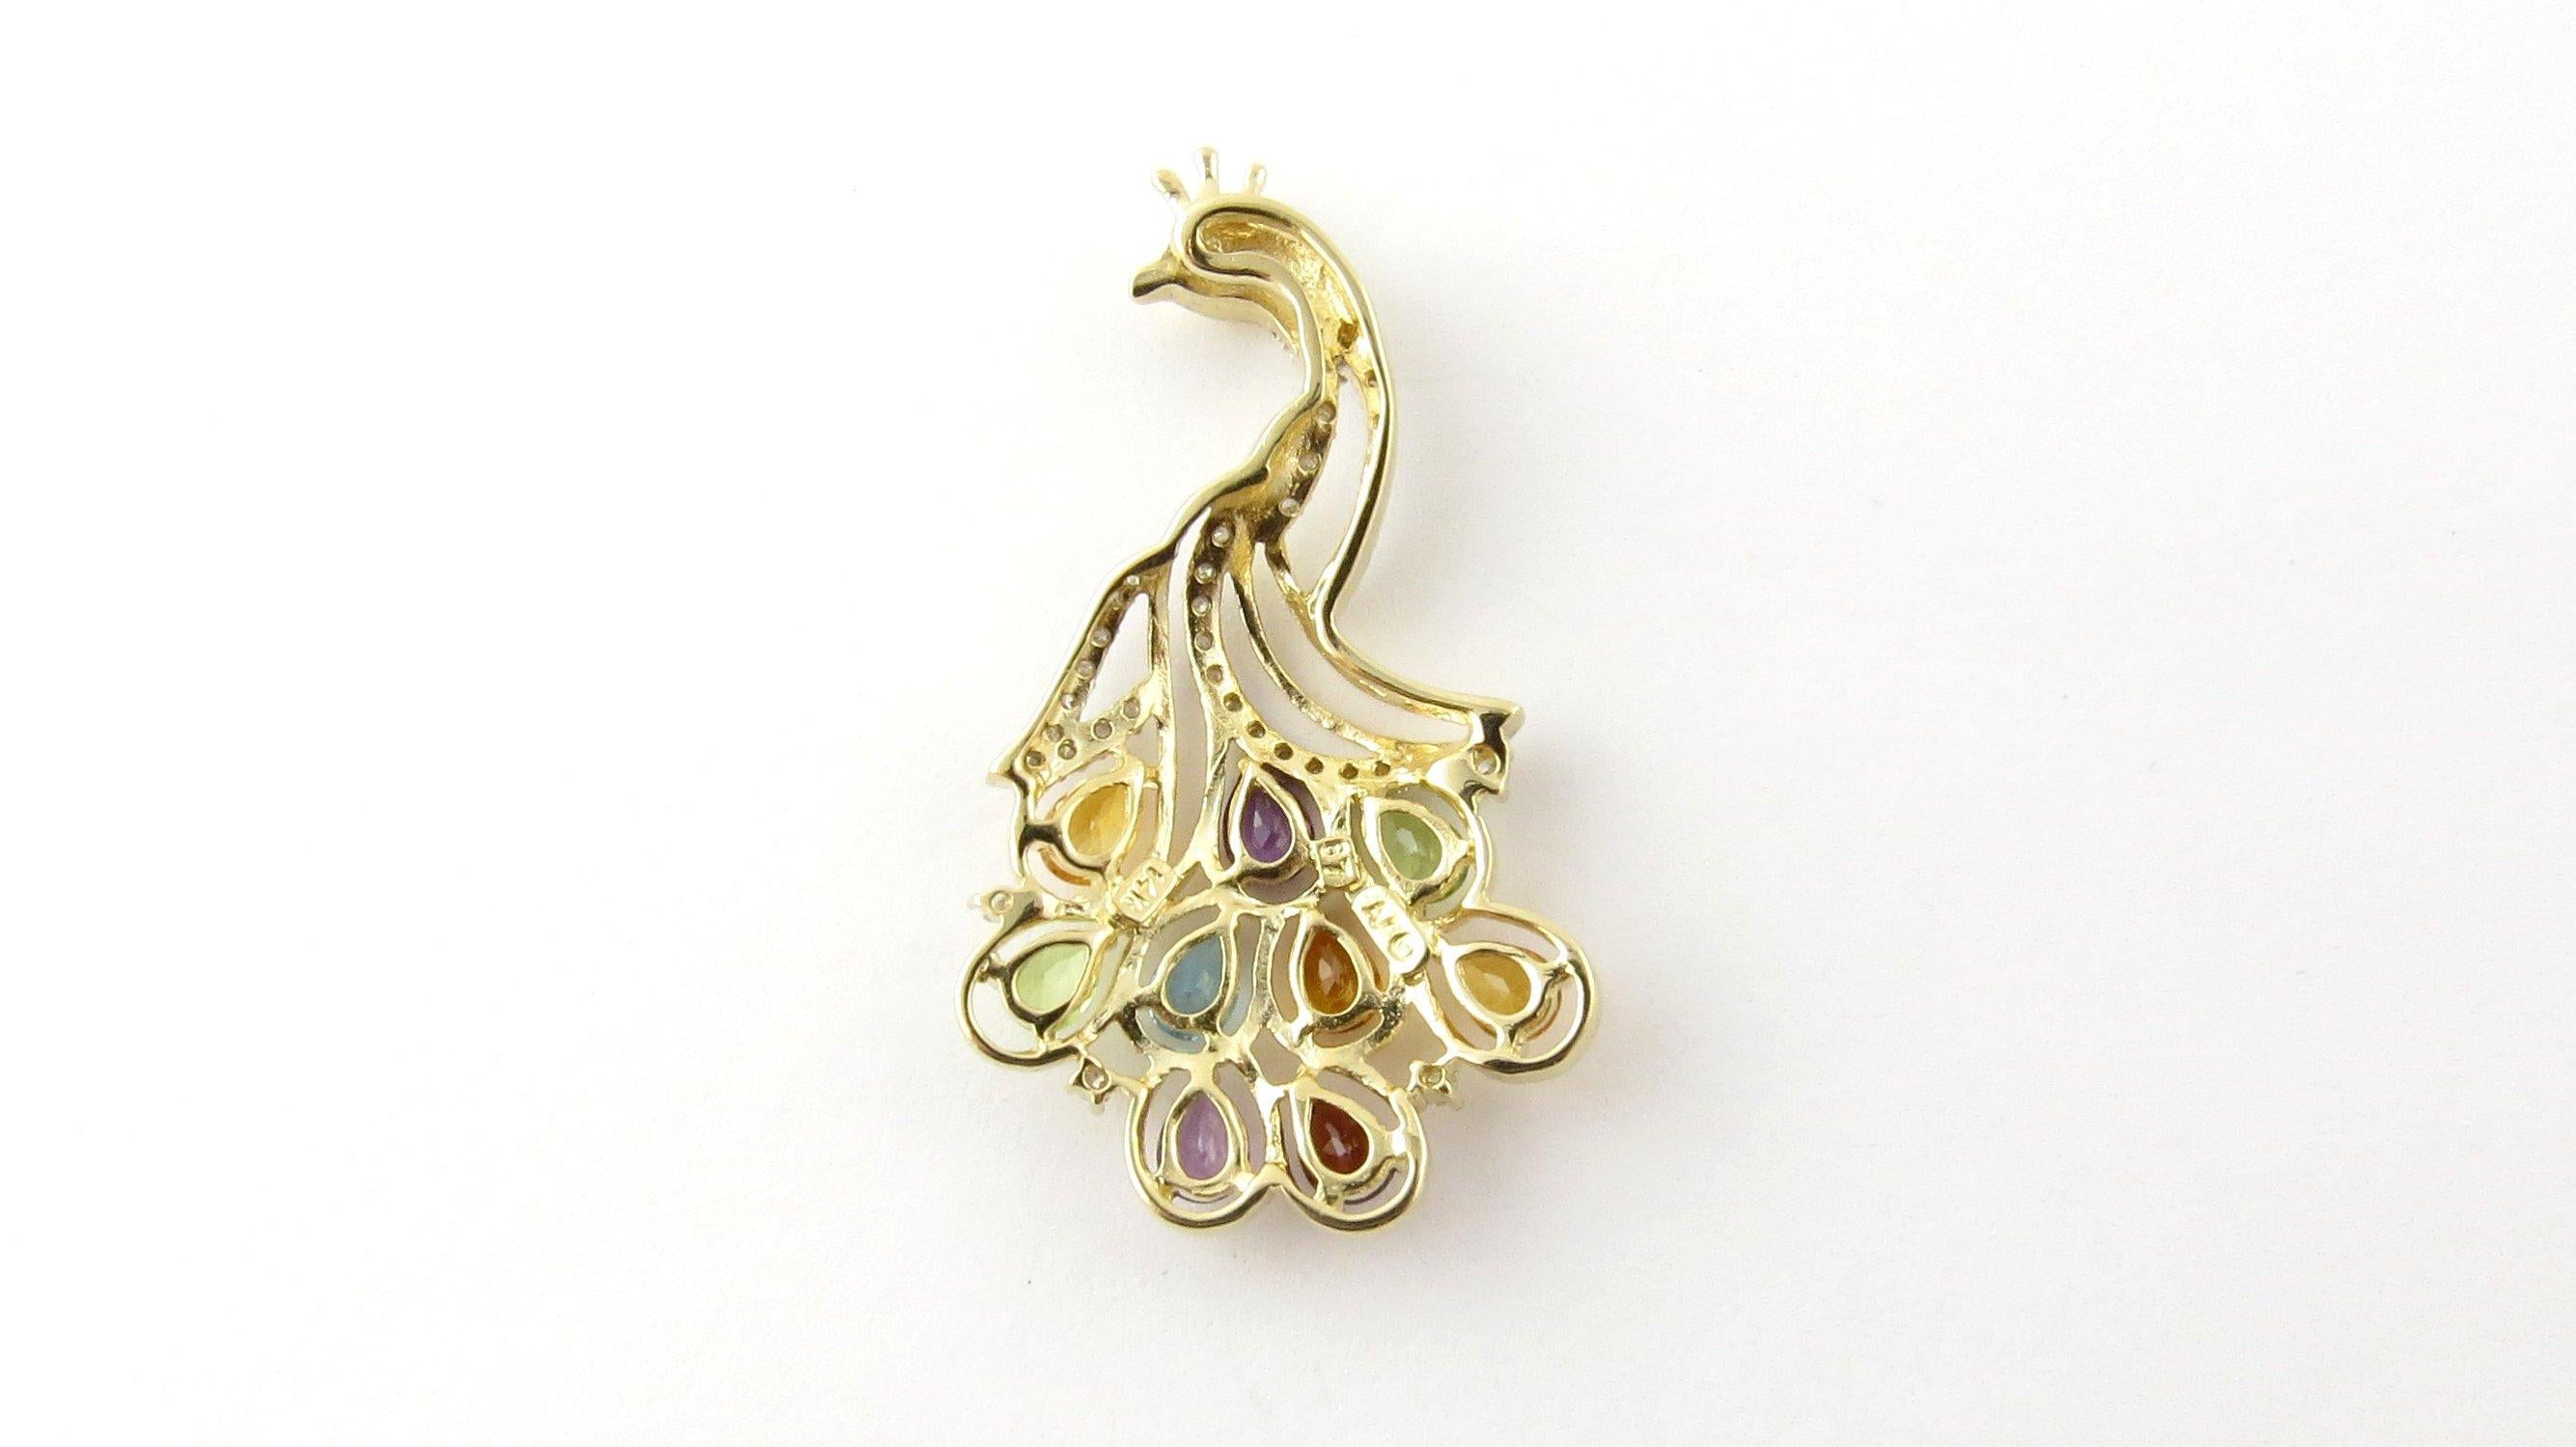 Vintage 14 Karat Yellow Gold Diamond and Gemstones Peacock Pendant. This stunning pendant features a glorious peacock detailed with 37 round single cut diamonds and nine pear-shaped genuine gemstones: two peridots, two amethysts, three citrines, one